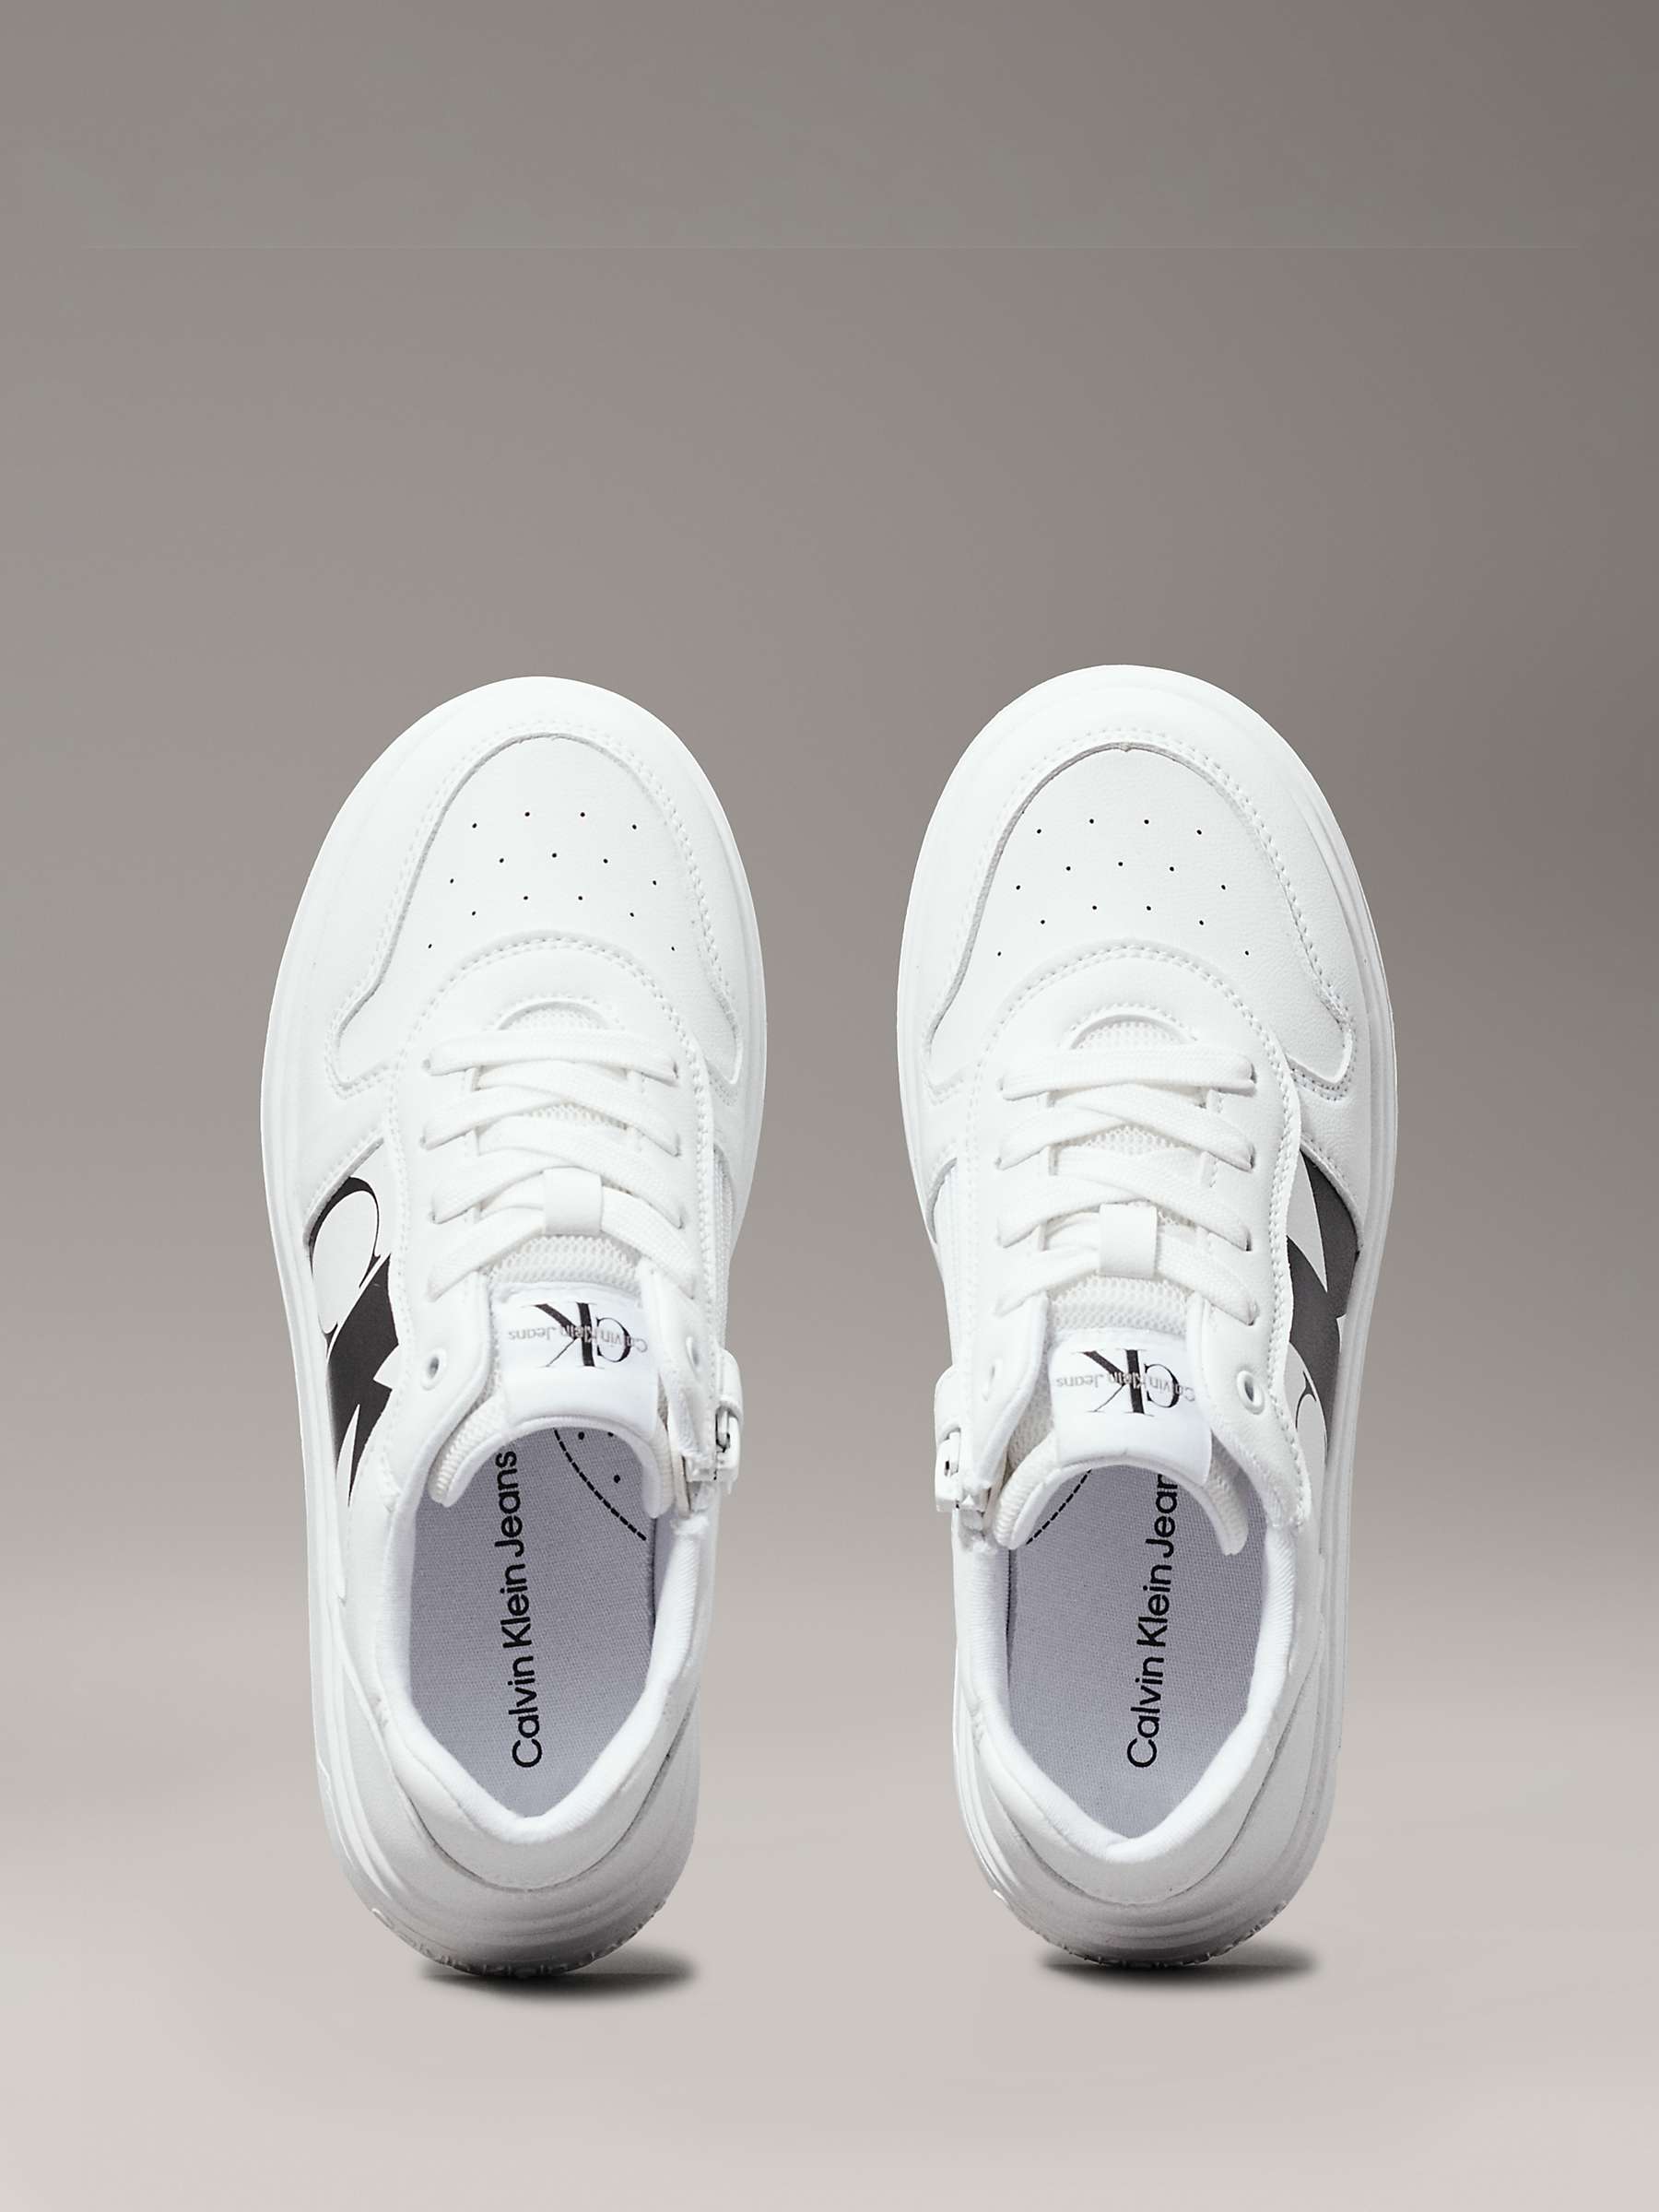 Buy Calvin Klein Kids' CK Low Lace-Up Trainers, White Online at johnlewis.com